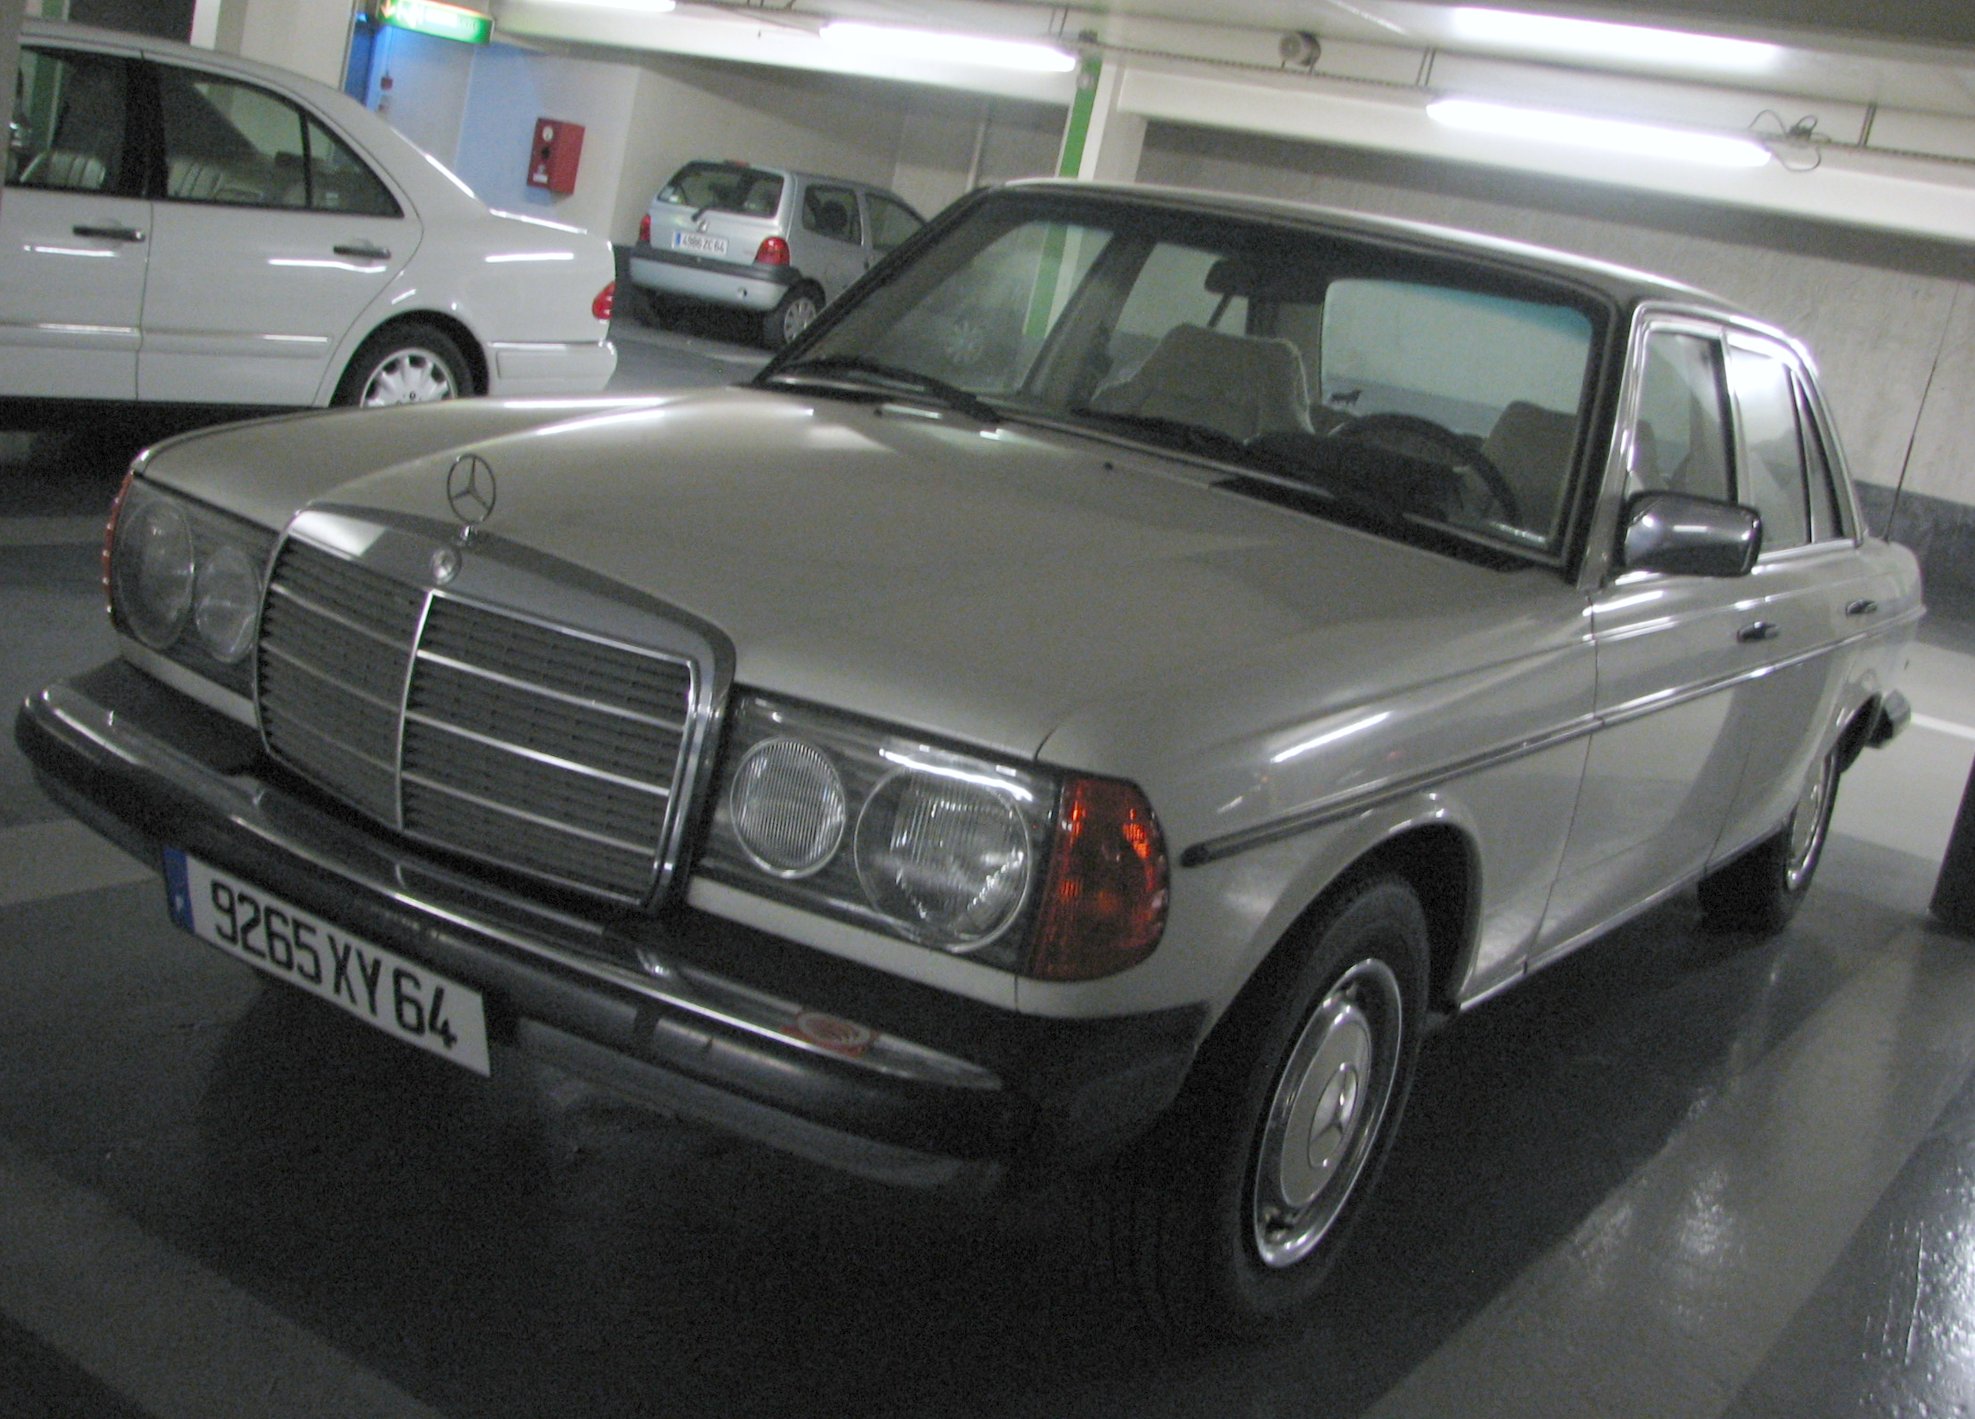 the front of an old mercedes in a garage